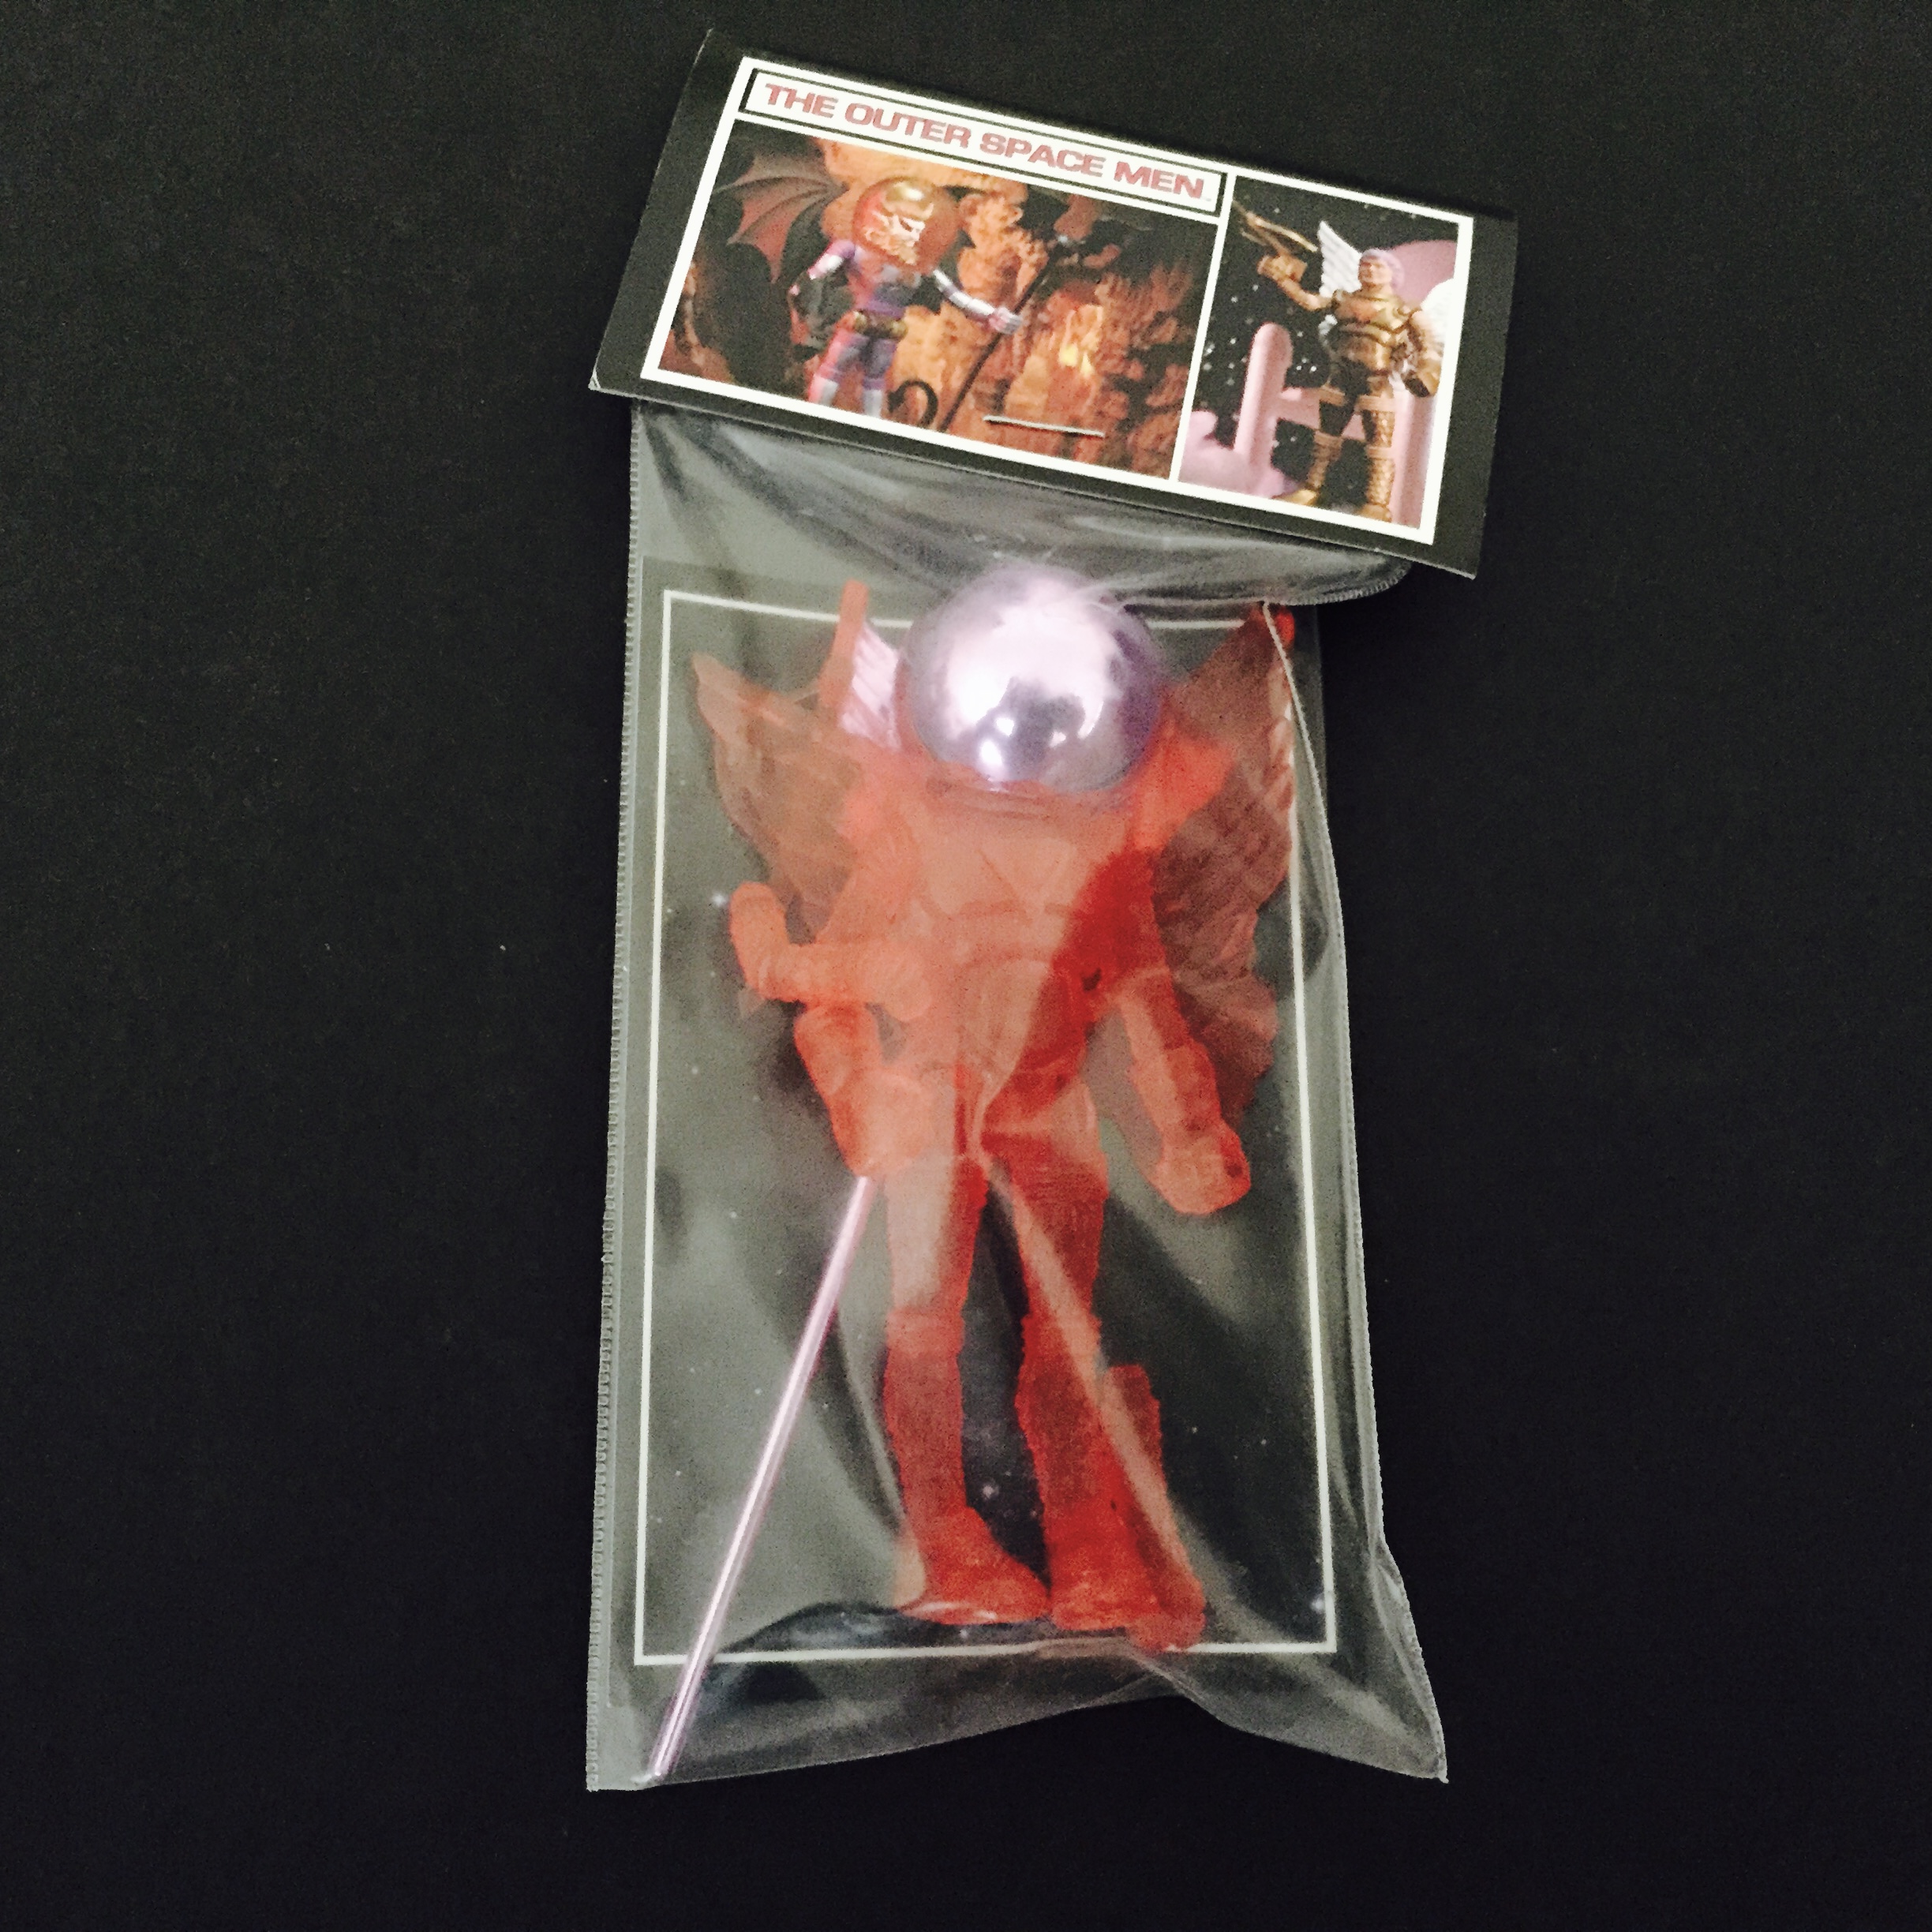 A 2011 GALACTIC HOLIDAY COMMANDER COMET LAVENDER ACC'S in a plastic bag with a red ball in it.